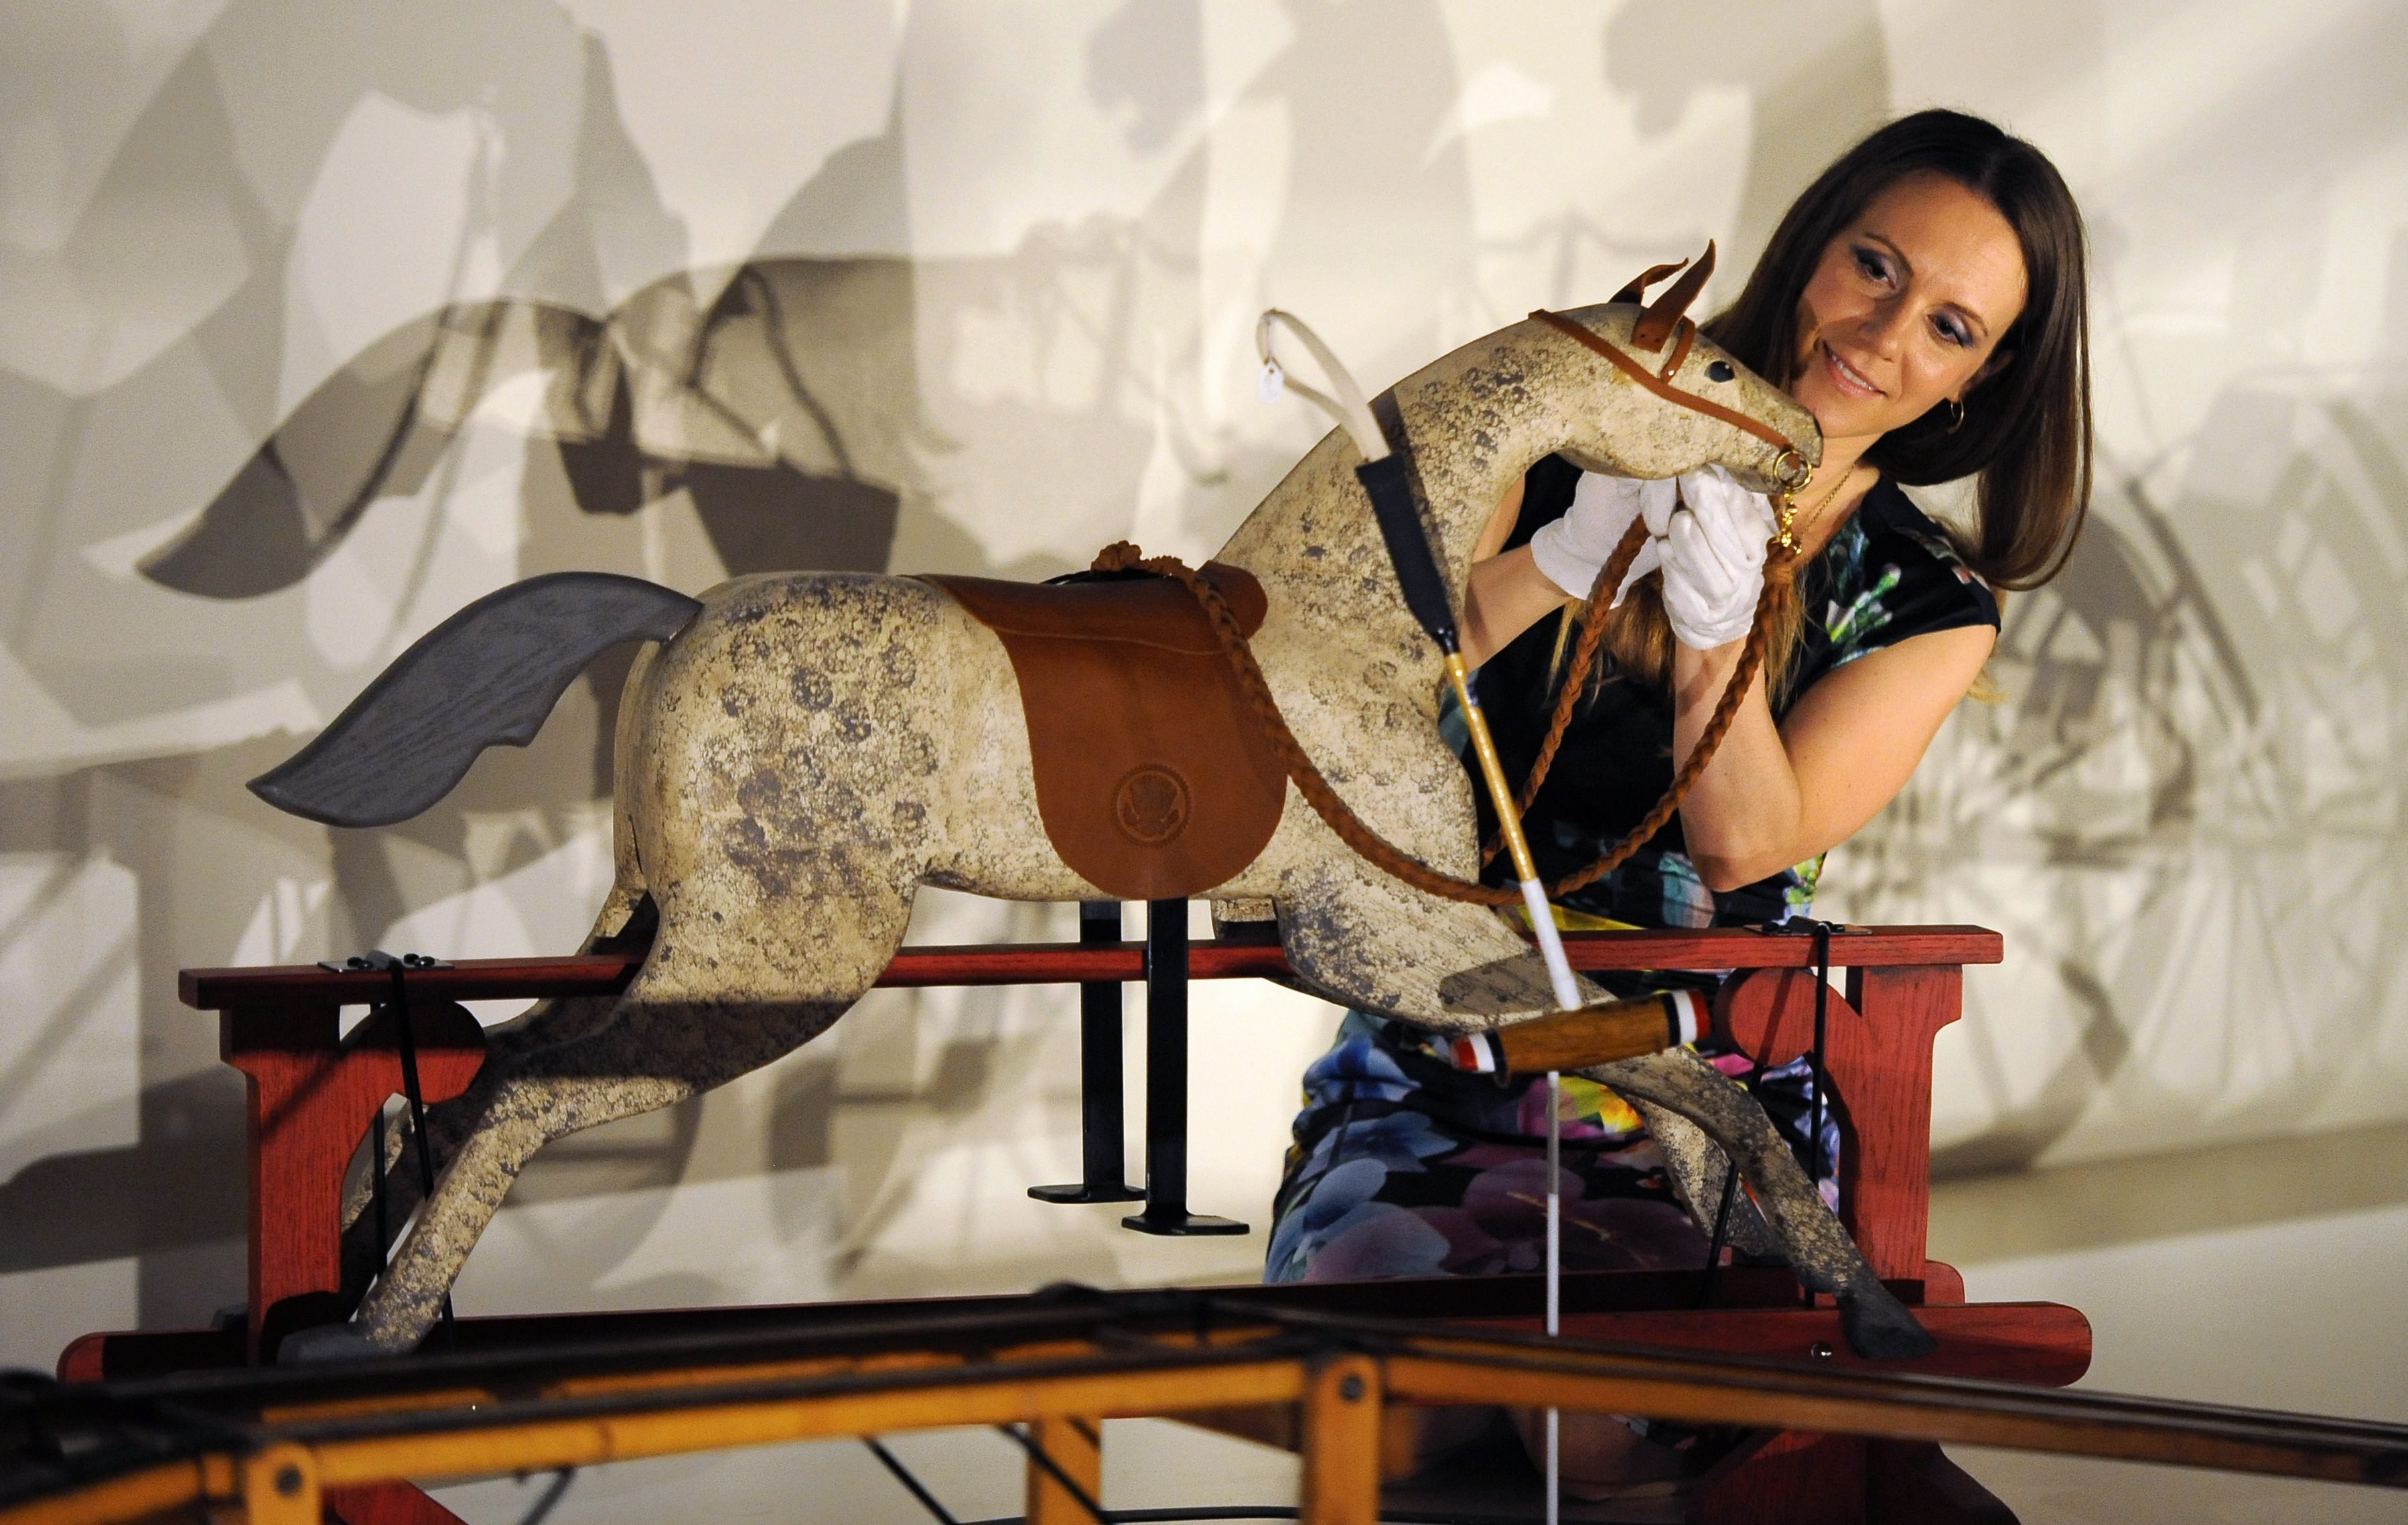 Curator Anna Reynolds adds the finishing touches to a rocking horse presented to Prince George of Cambridge by U..S President Barak Obama and his wife Michelle Obama at the 'Royal Childhood' exhibition at Buckingham Palace in London on July 24, 2014. (Andrew Matthews—PA Wire/EPA)